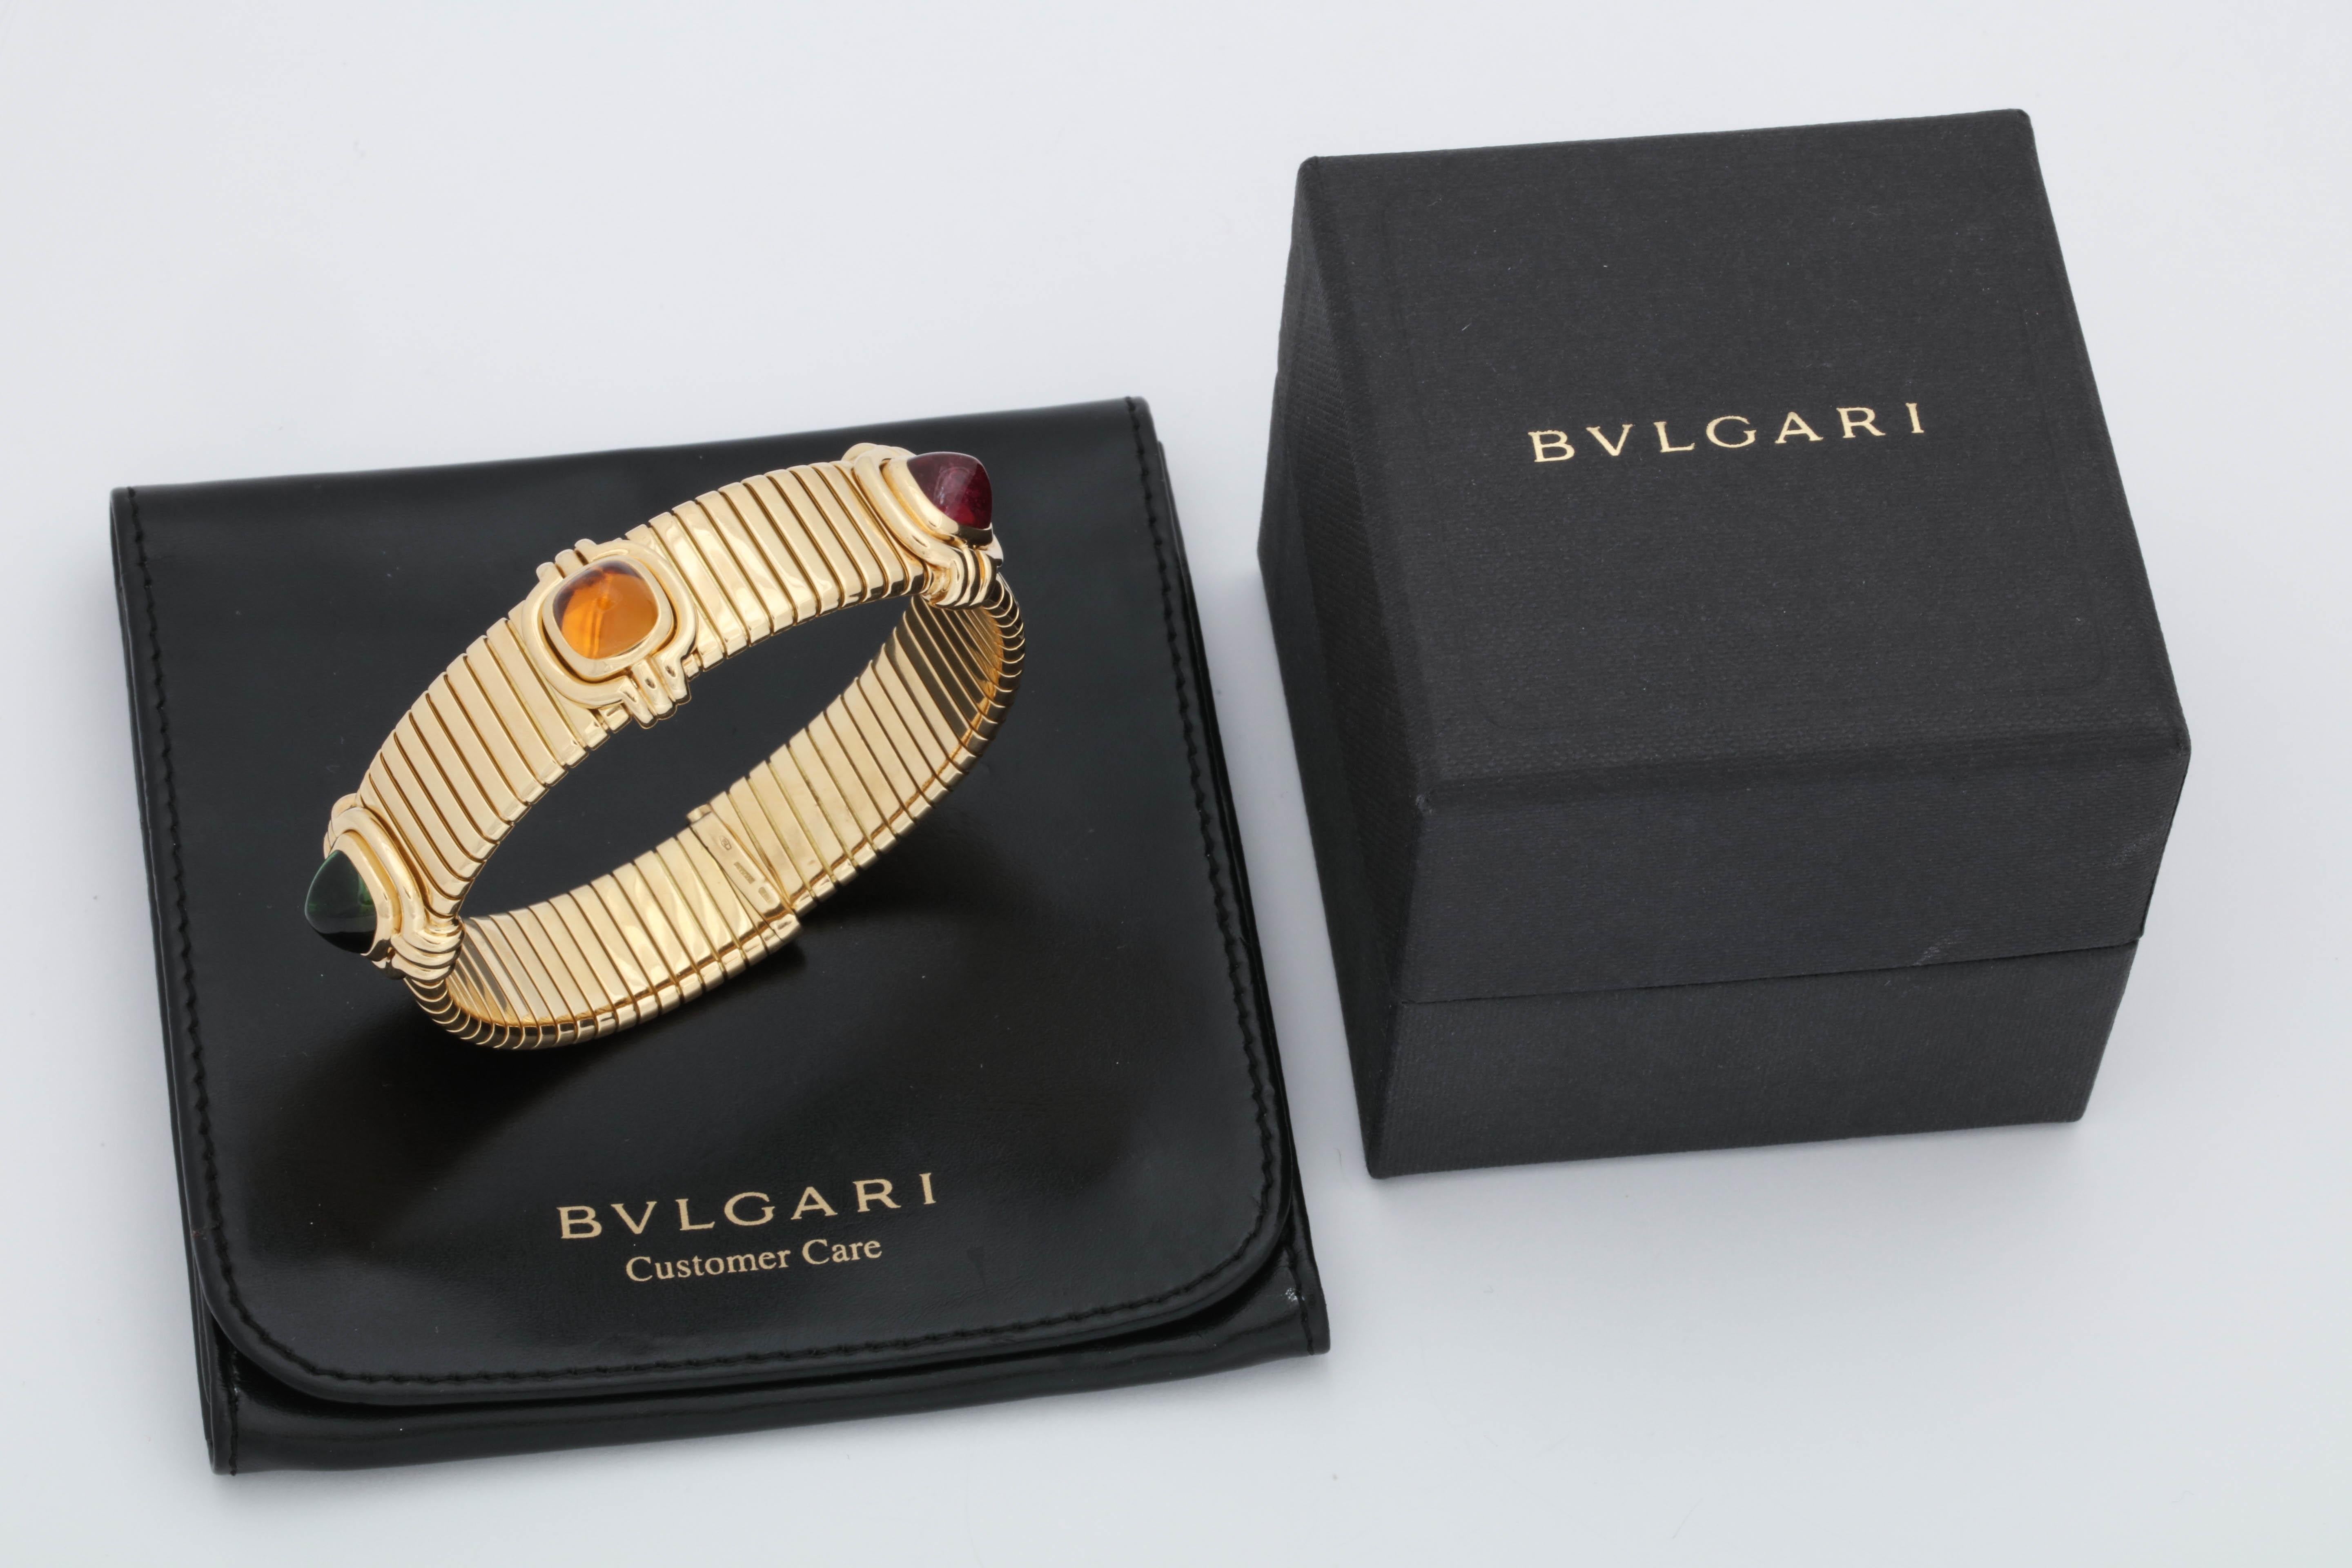 One Tubogas Bracelet Composed Of 18kt Yellow Gold Centering Three Semi Precious Custom Cut Sugarloaf Stones.One Rubelite,One Green Tourmaline And With One Citrine Measuring Approximately 7.5 MM Each Stone.Designed By Bulgari In The 1980's.NOTE:Fits